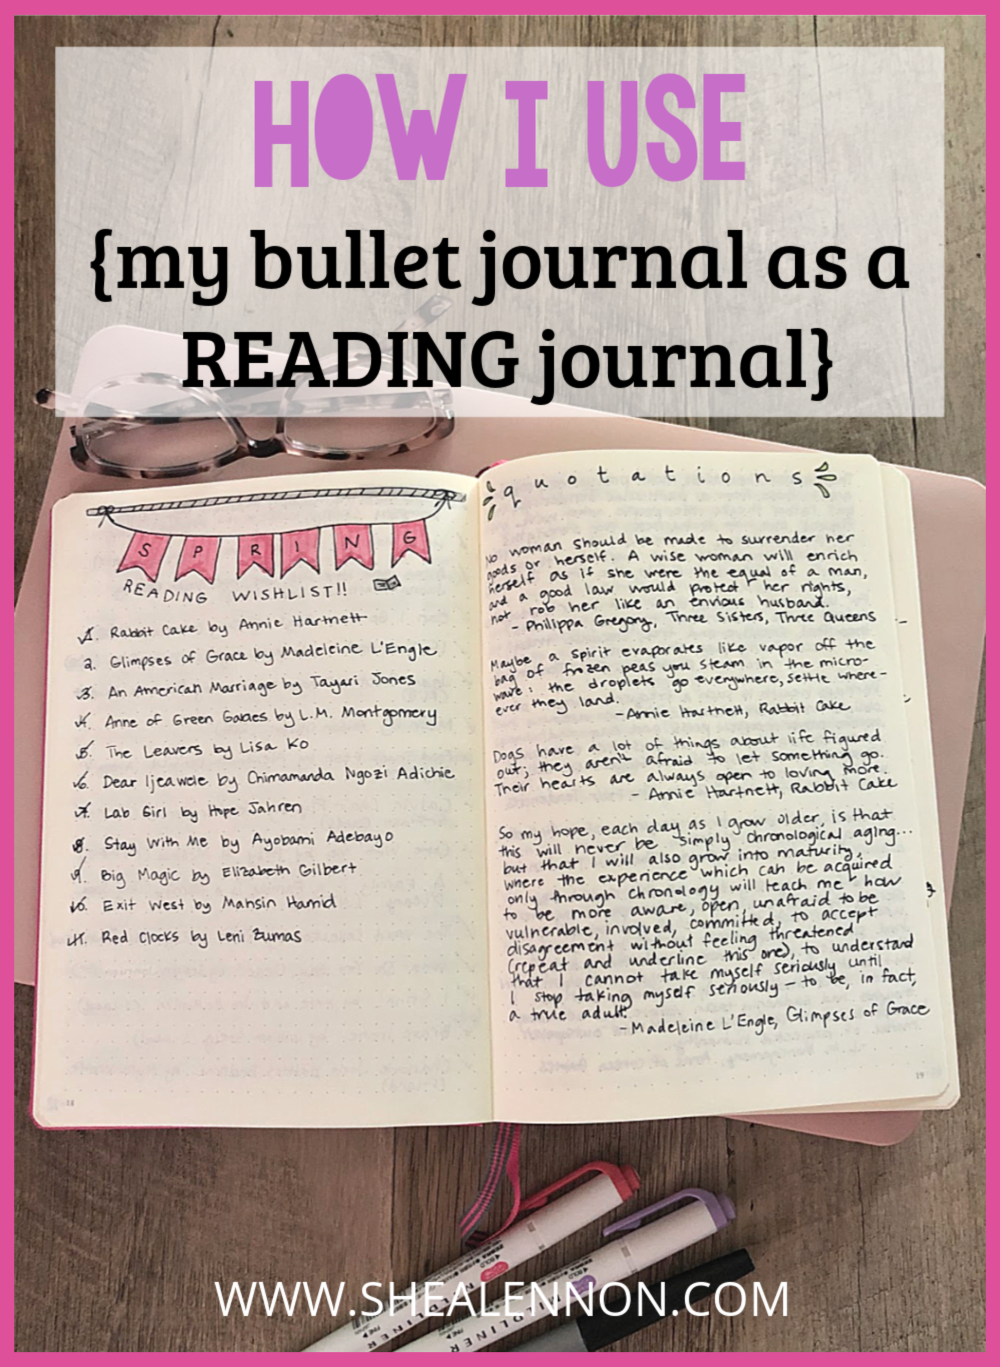 How I Use a Bullet Journal to Track Reading | Shea Lennon